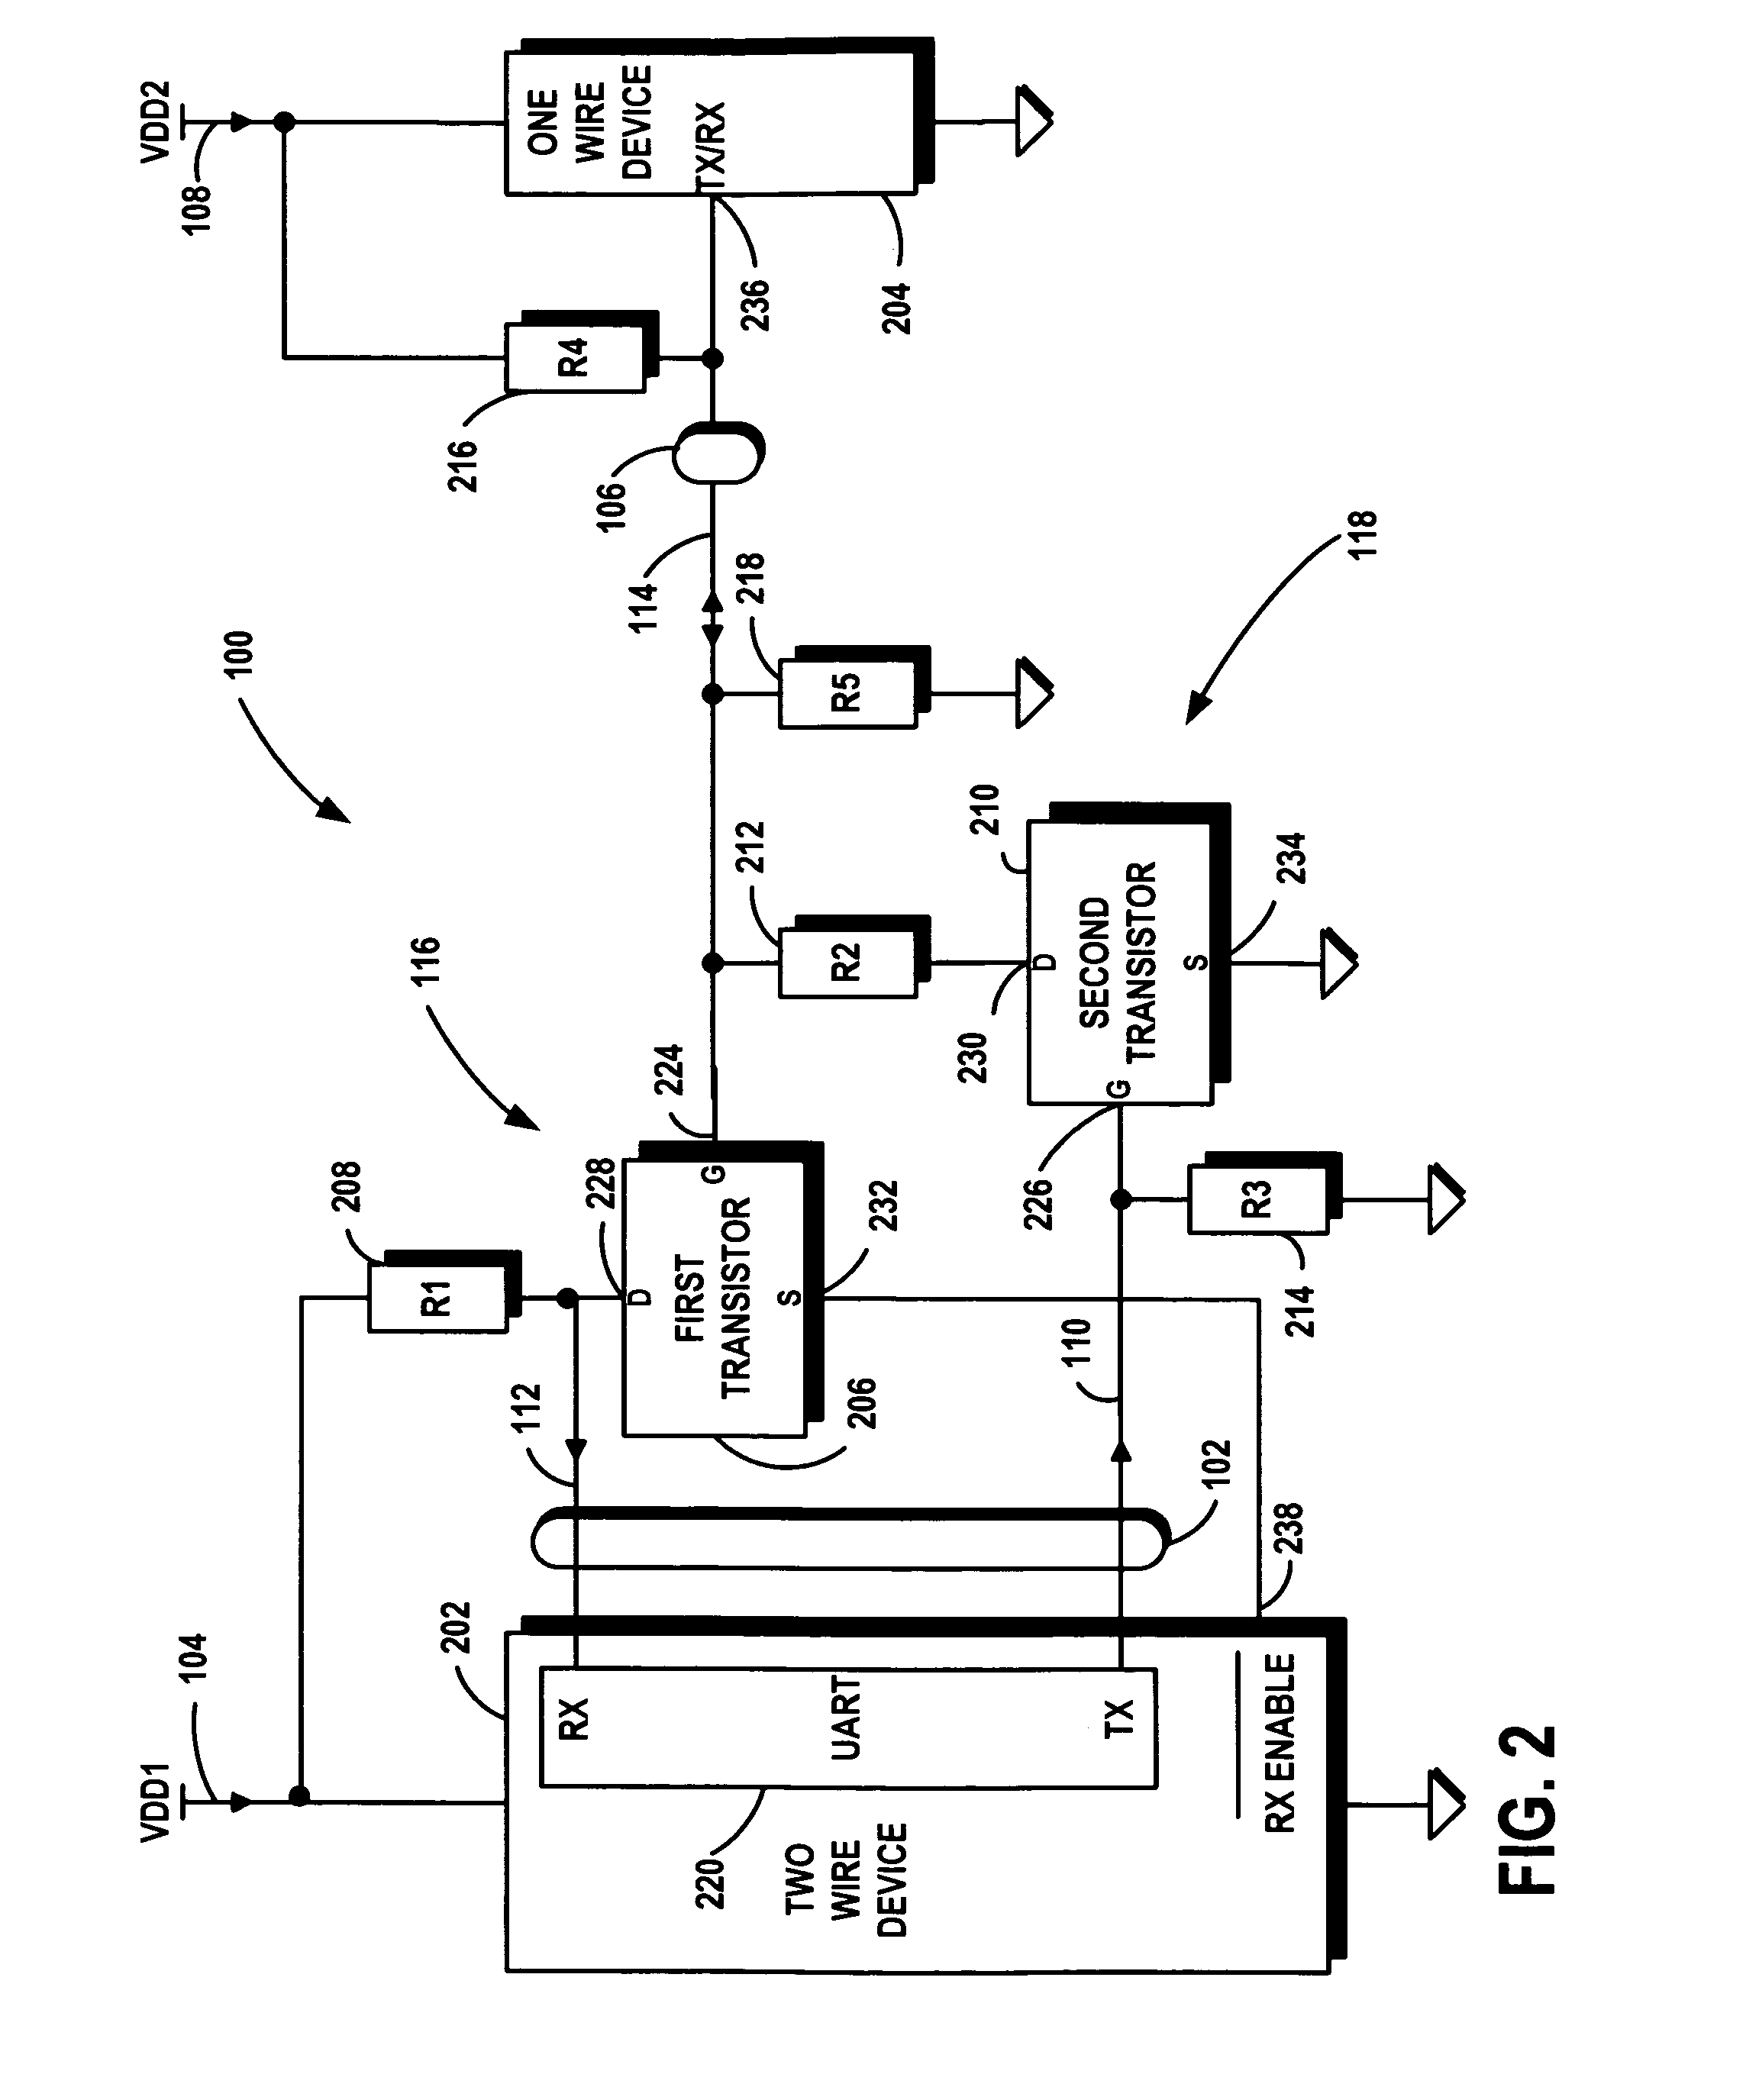 Level shifting multiplexing circuit for connecting a two conductor full duplex bus to a bidirectional single conductor bus